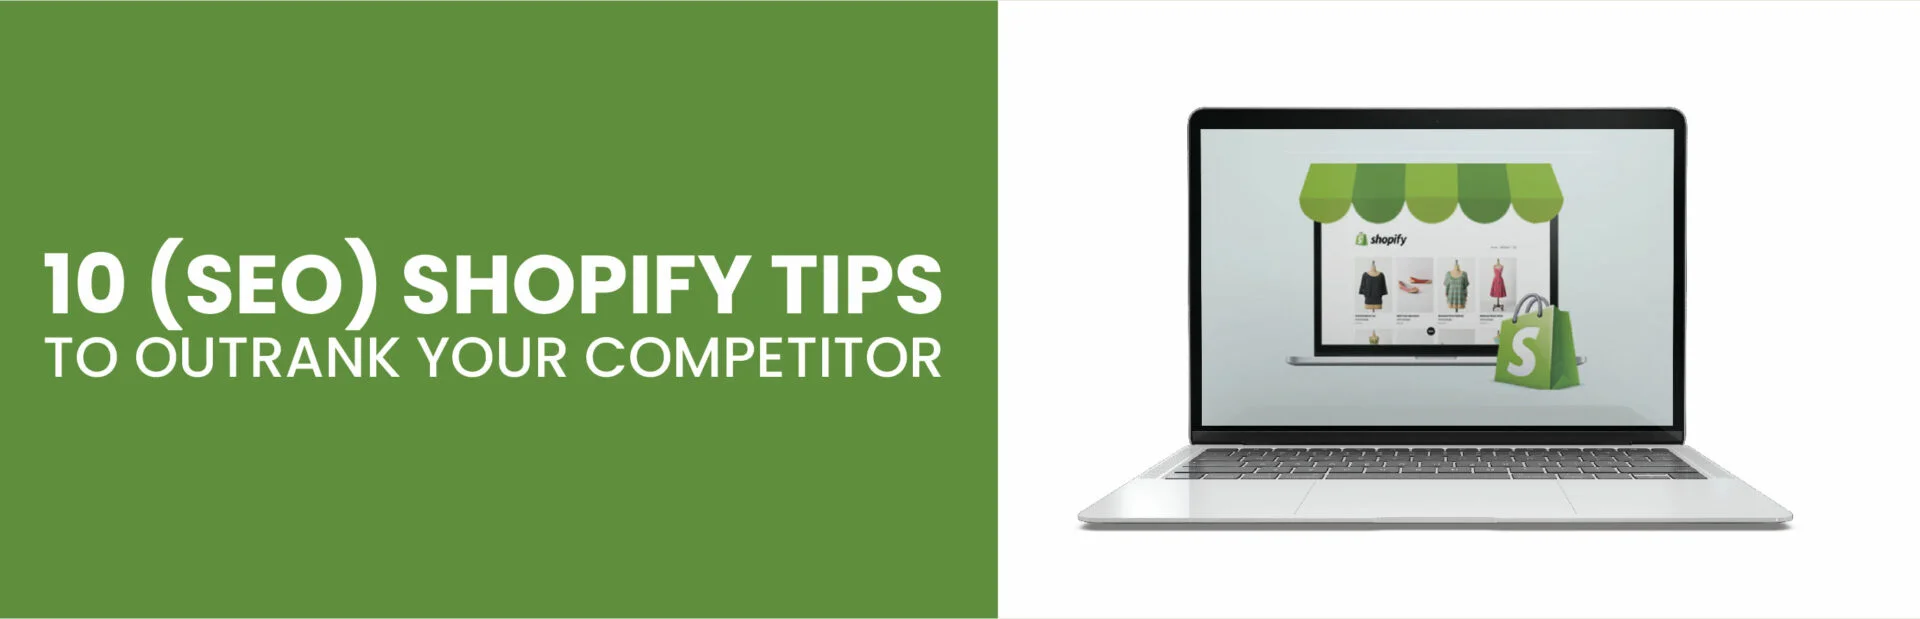 10 (SEO) Shopify Tips to Outrank Your Competitor